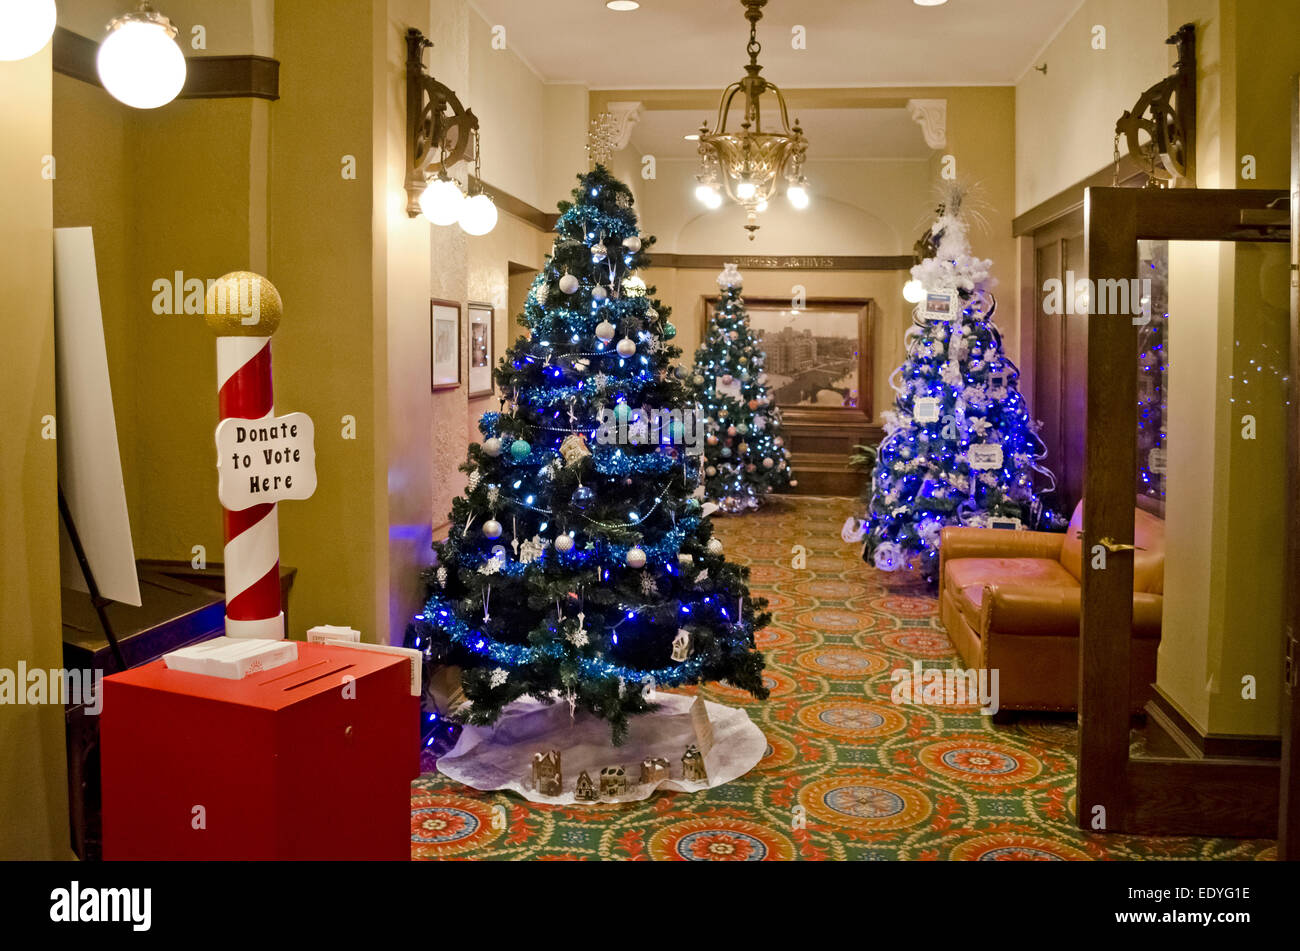 Part of the 'Festival of Trees' at the Fairmont Empress Hotel in Victoria, BC, Canada. Christmas trees on display for charity. Stock Photo